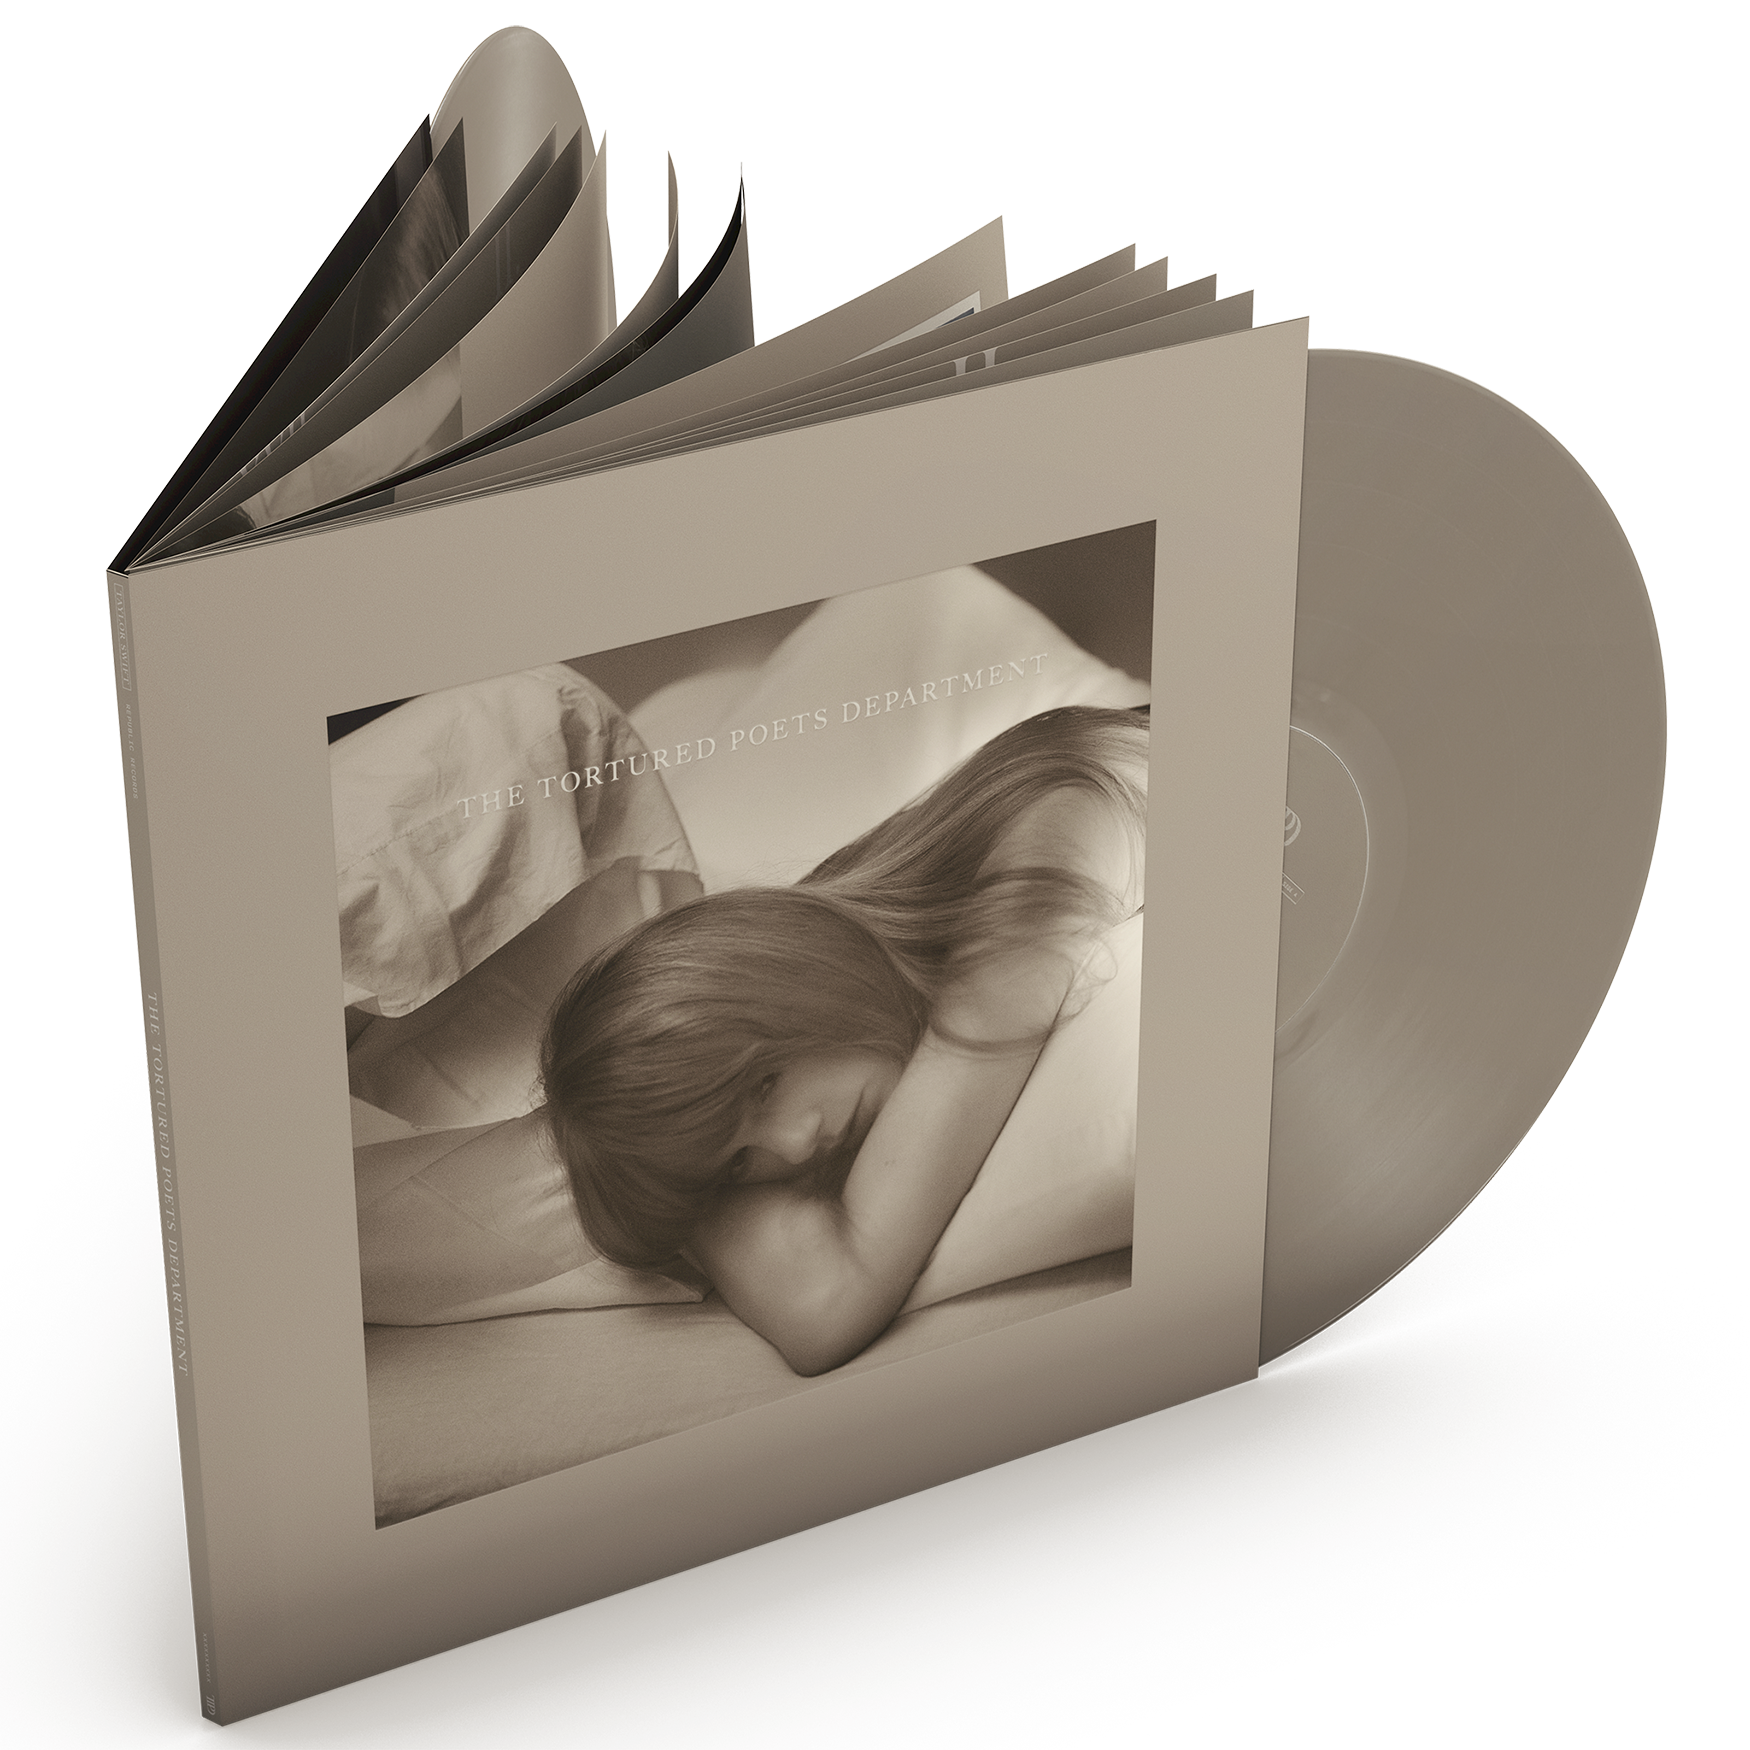 Taylor Swift - The Tortured Poets Department Special Edition Vinyl + Bonus Track "The Bolter"